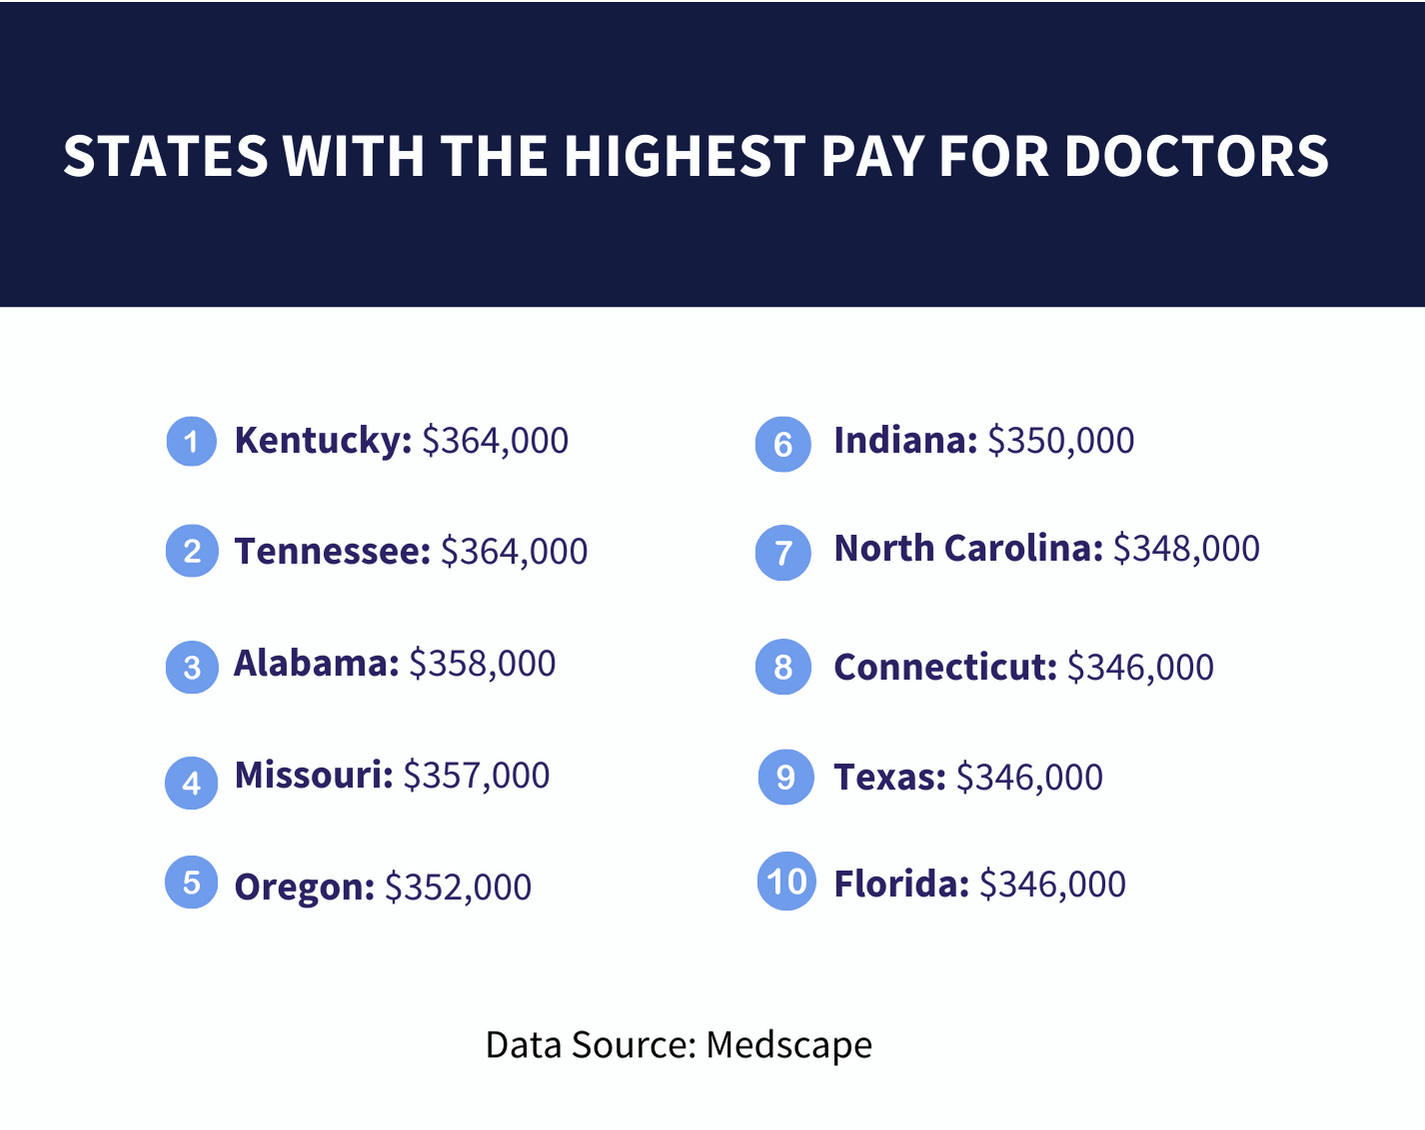 States with the Highest Pay for Doctors